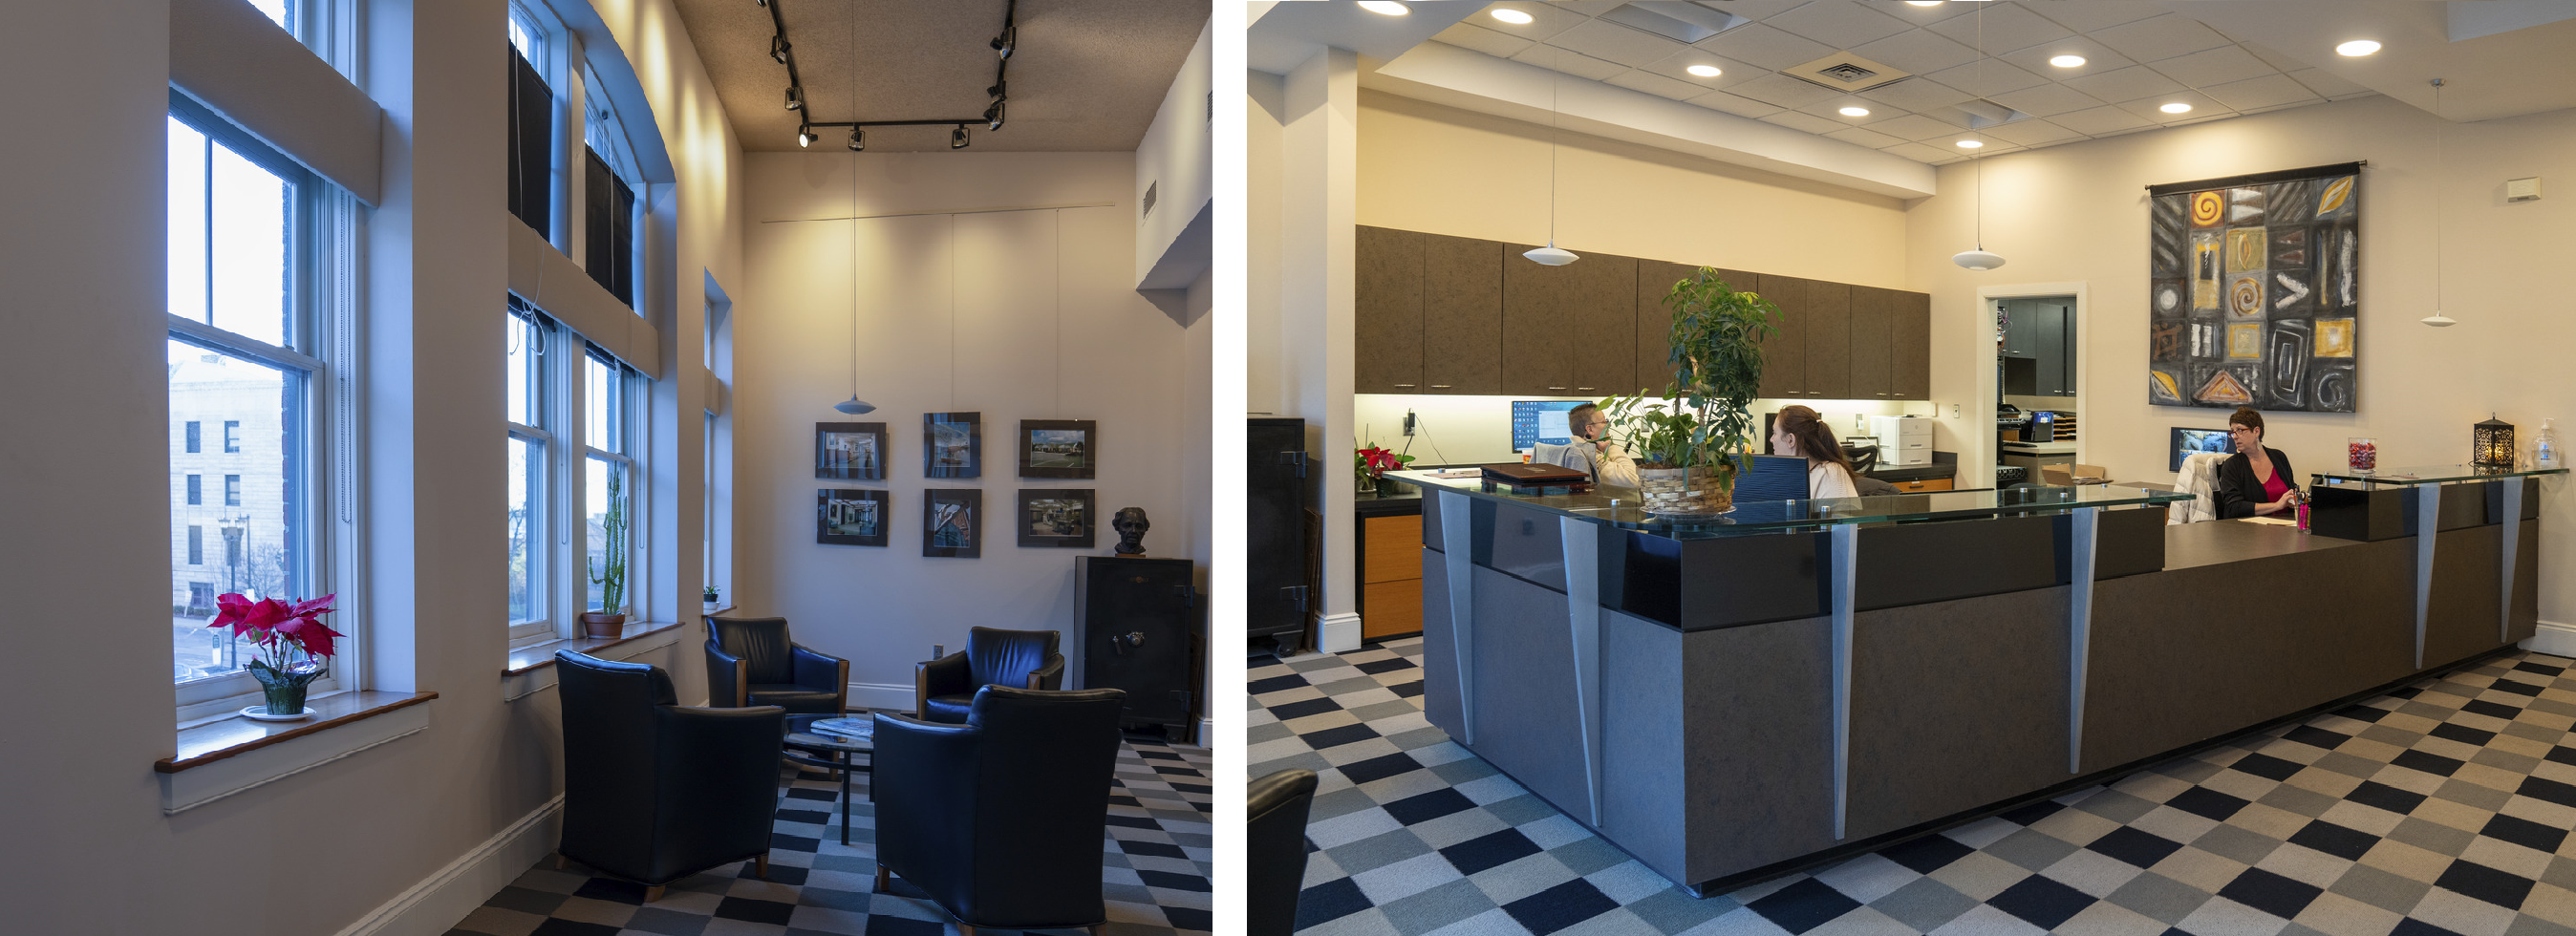 Two images side by side. On the left, an office with vaulted ceilings, modern furniture, airy light fixtures and a black-and-white checkered floor. On the right, a modern office with contemporary art, an expansive front desk and a black-and-white checkered floor.